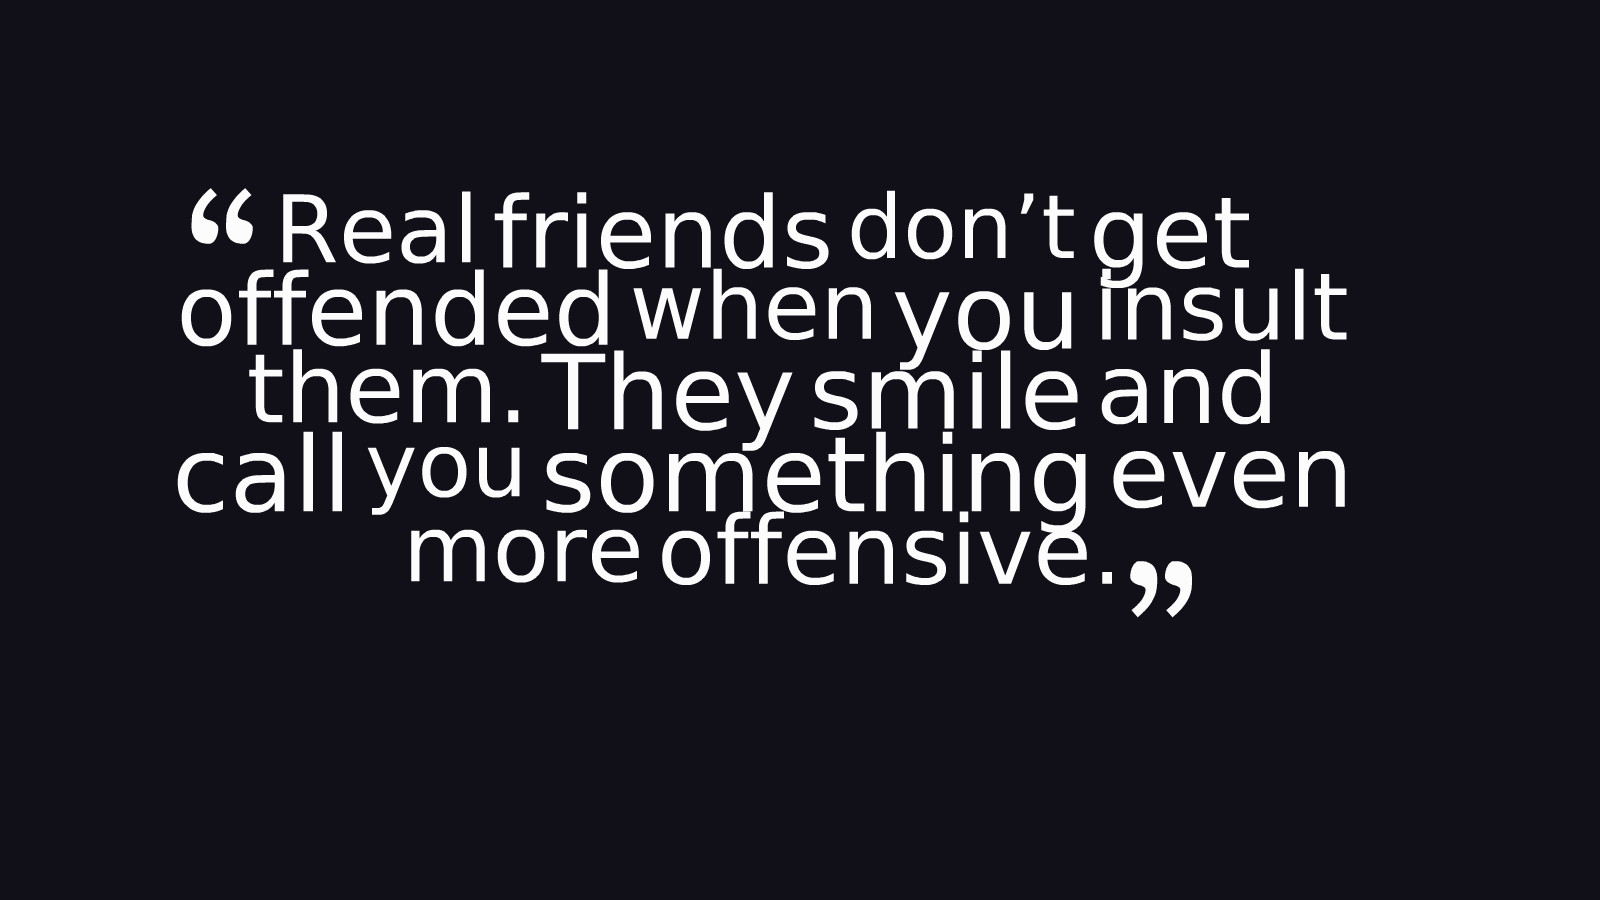 Quotes Bad Friendships
 25 Best Friendship Quotes